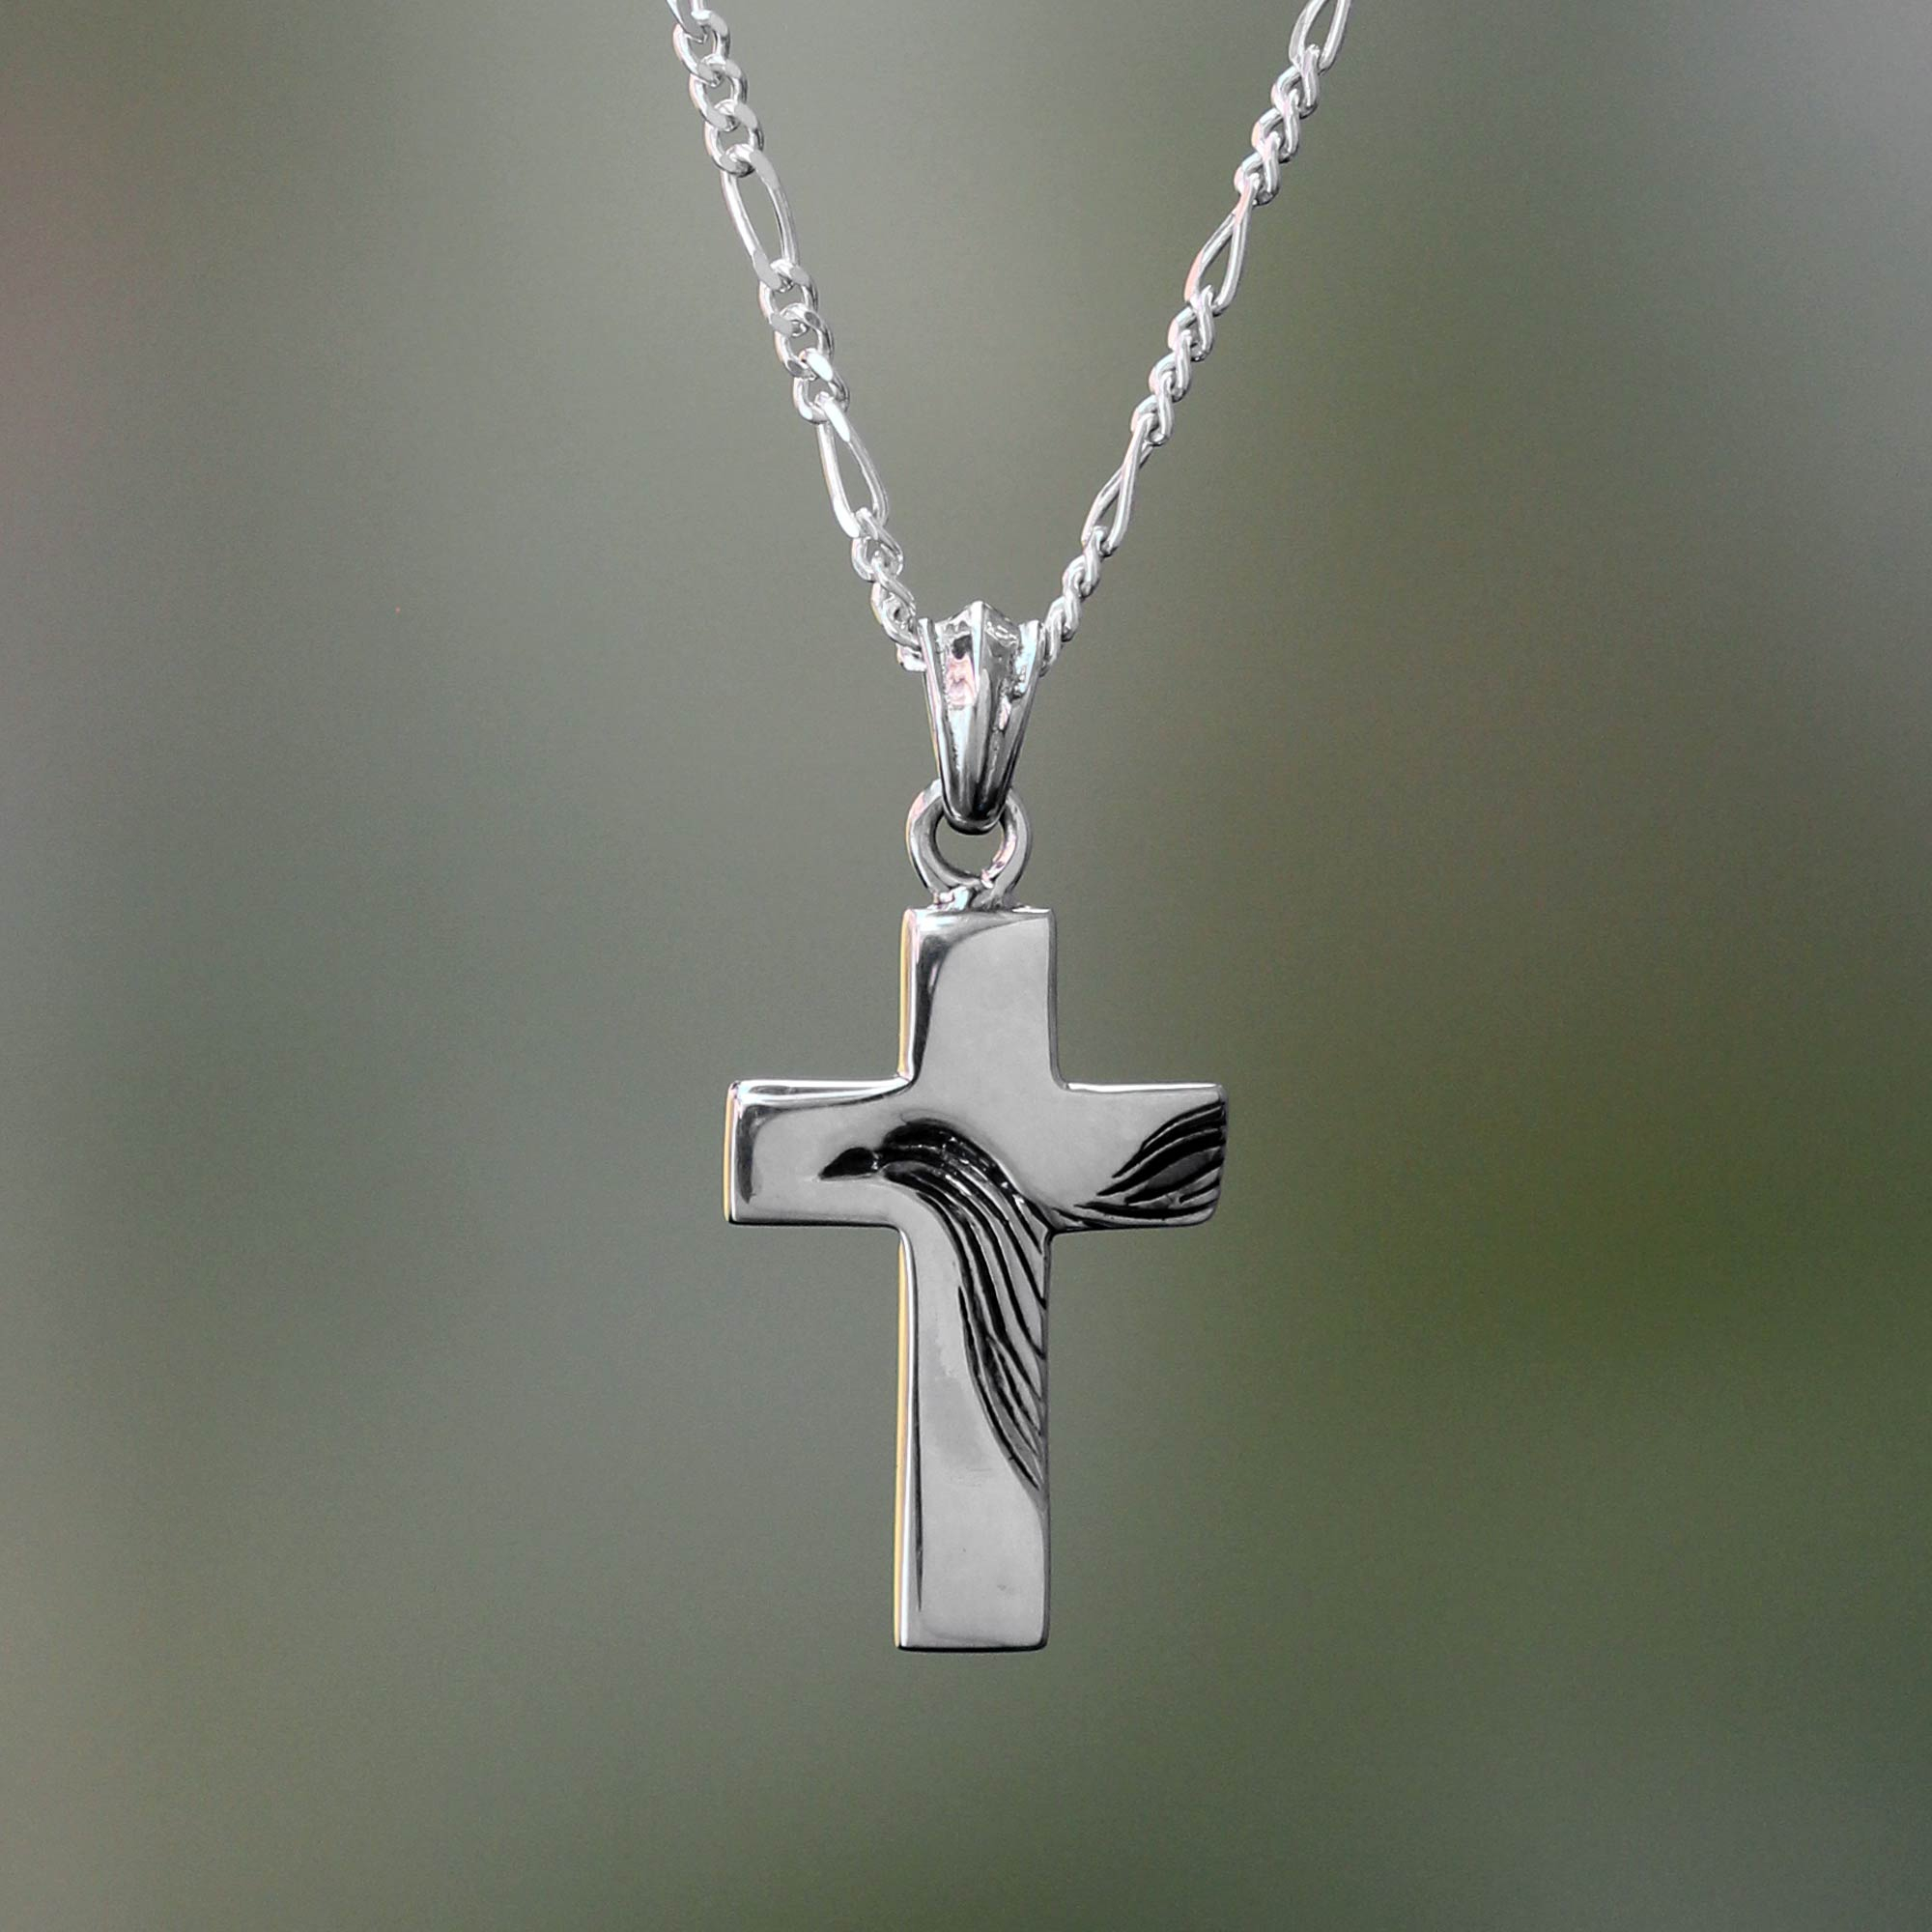 High Quality 925 Silver Modern Designer style Cross Necklace Pendant 5-06 